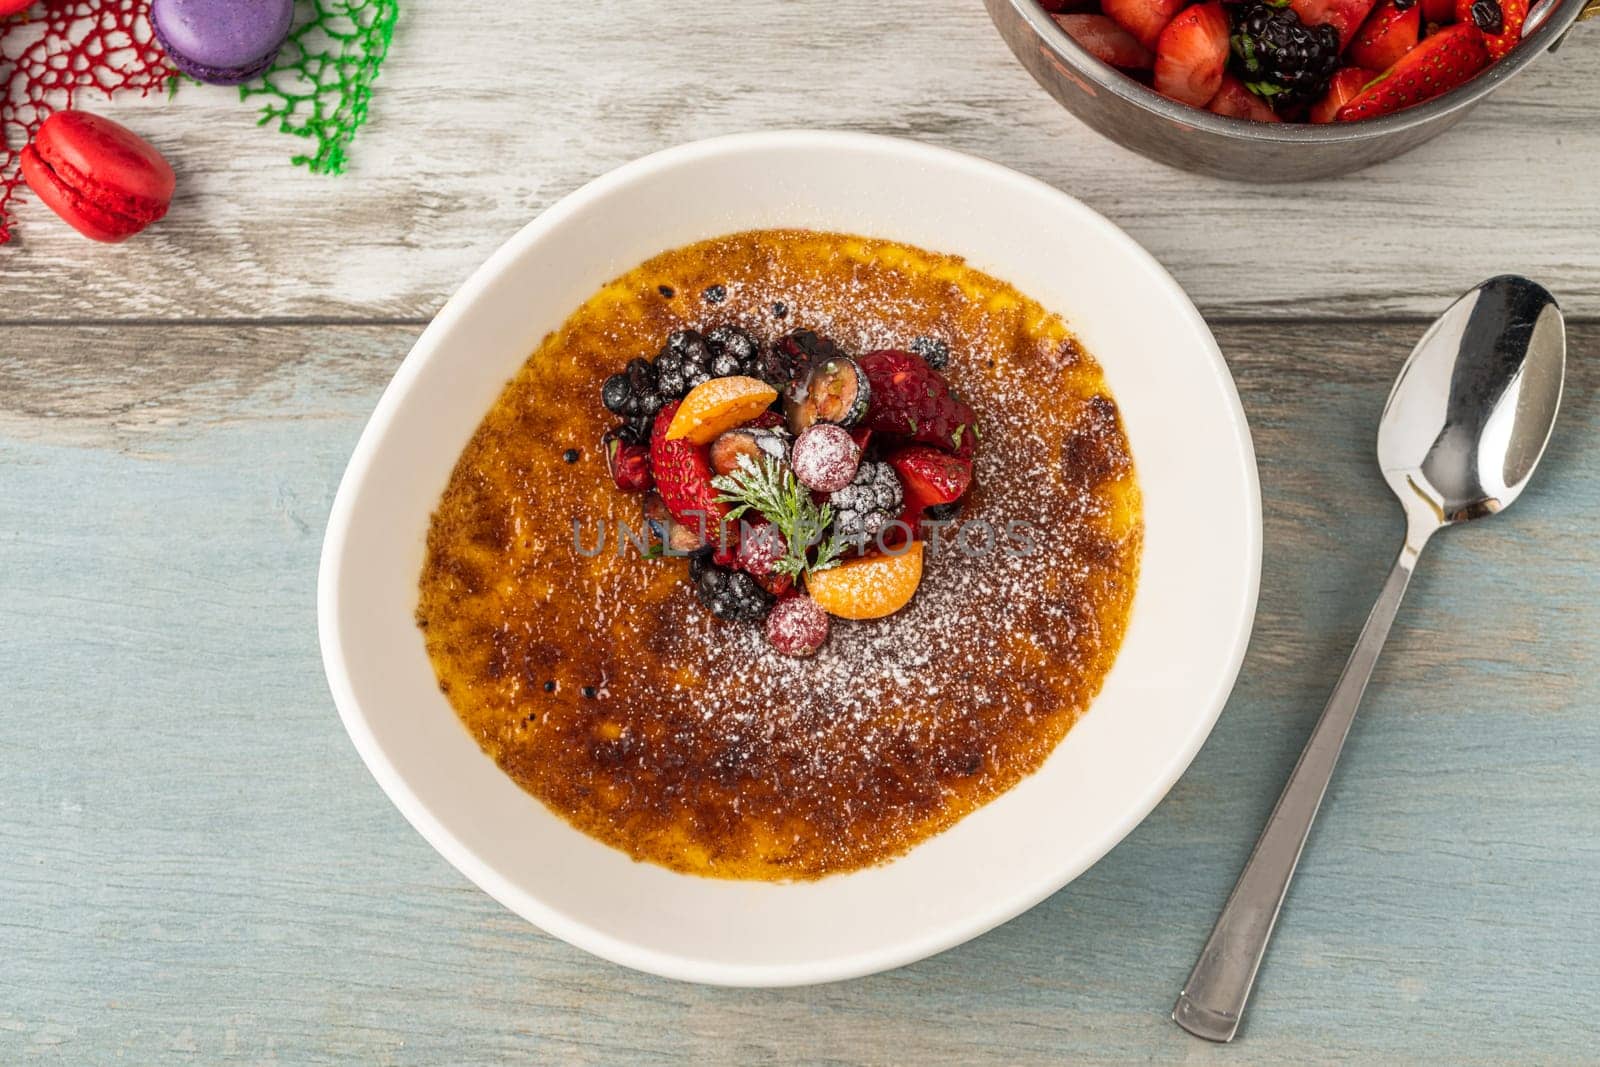 Creme brulee decorated with fruits and powdered sugar on a wooden table by Sonat